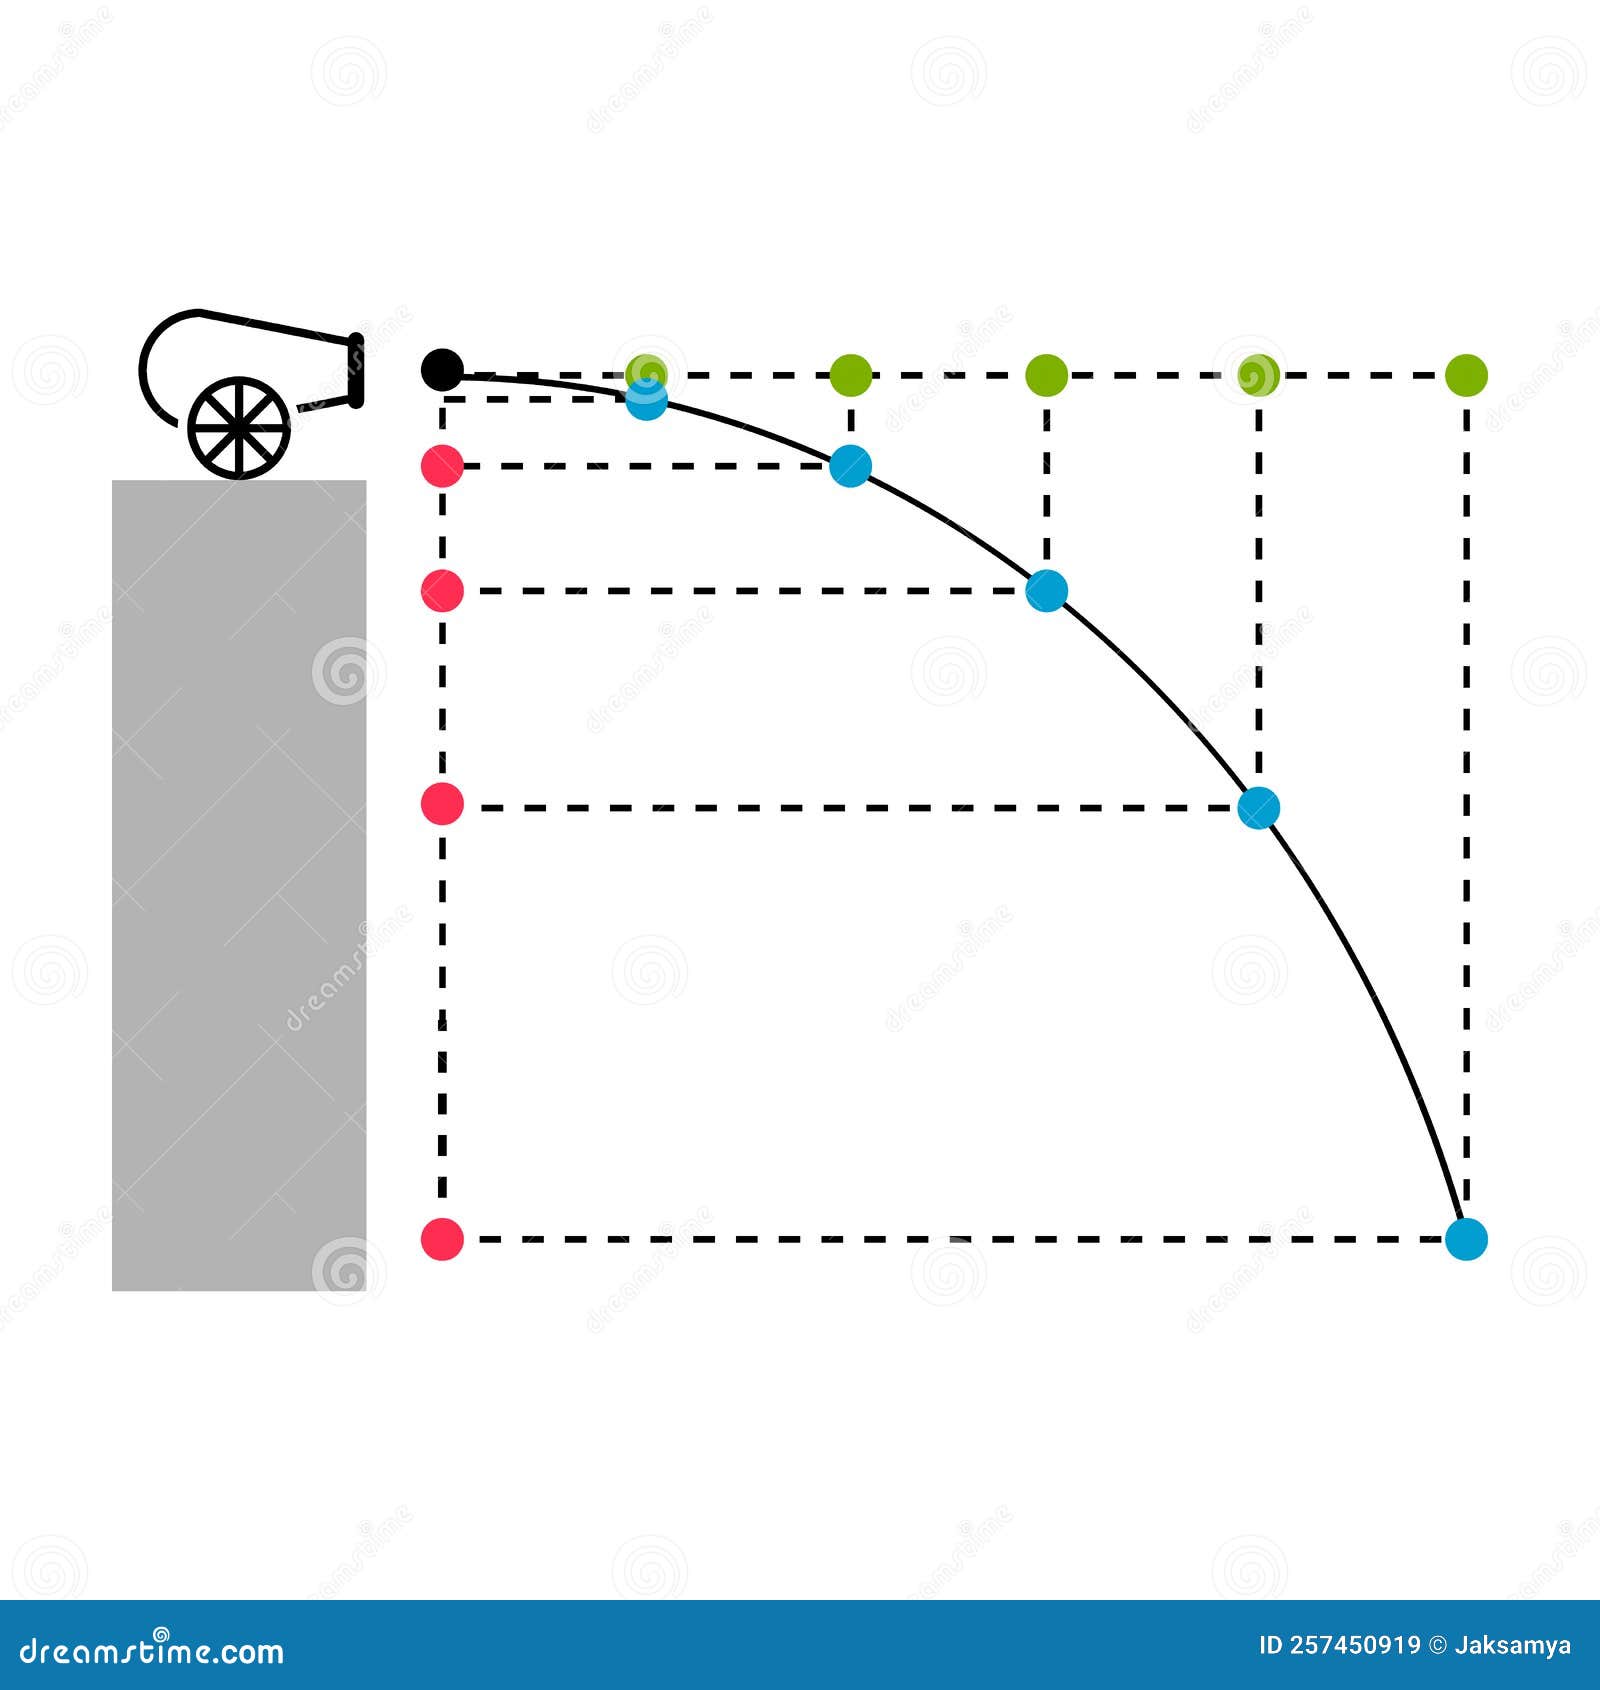 diagram shows the projectile motion of a cannonball shot at a horizontal angle.